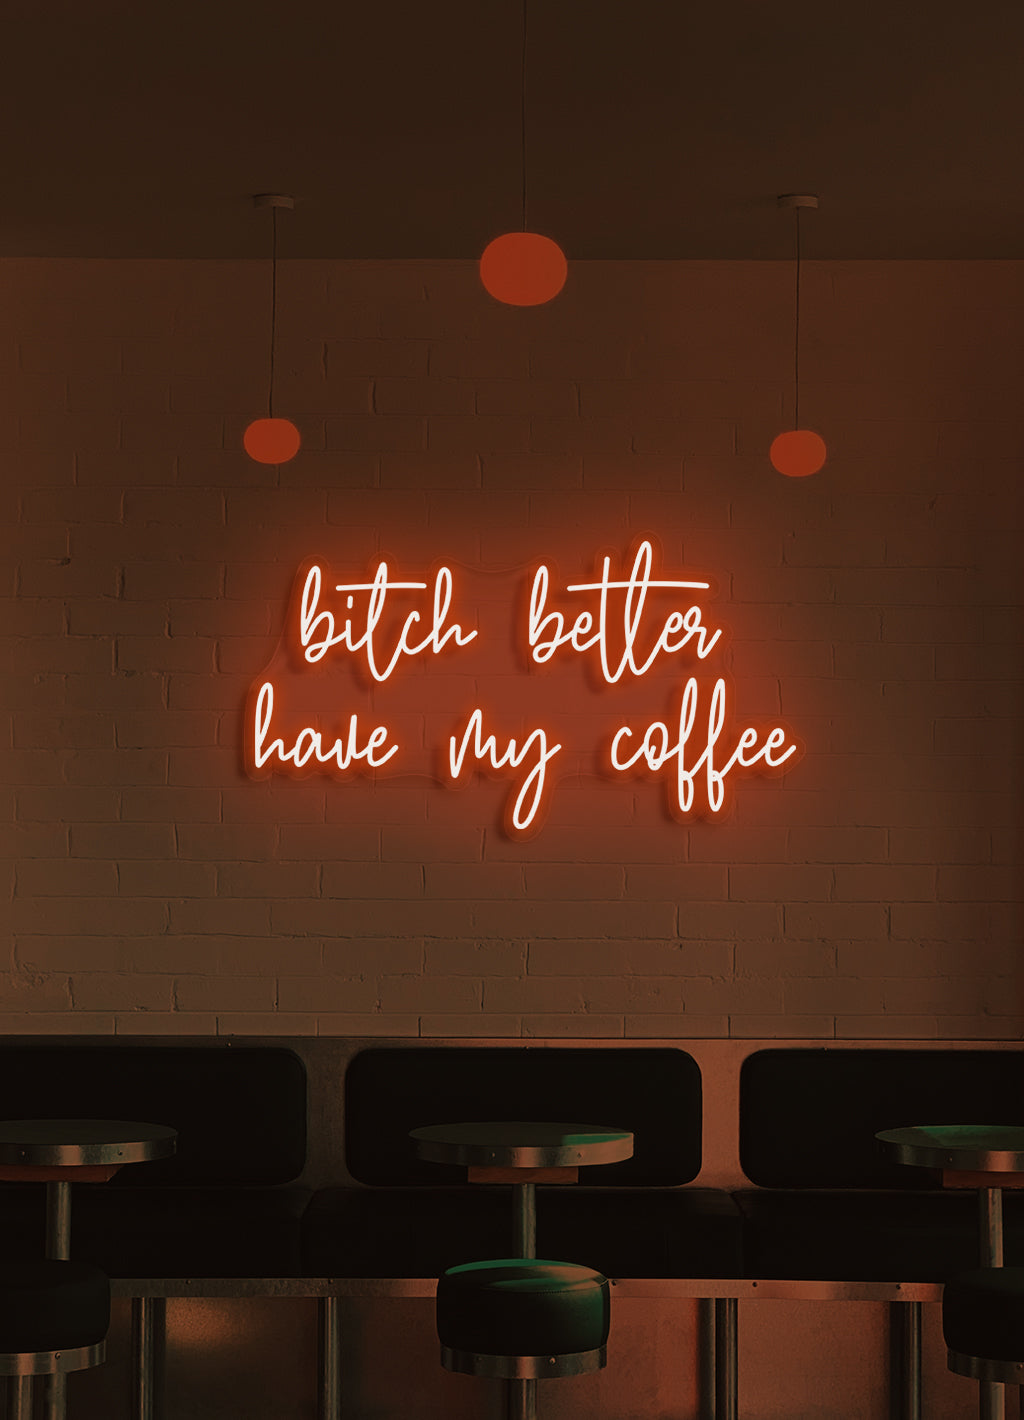 Bitch better have my coffee - LED Neon skilt